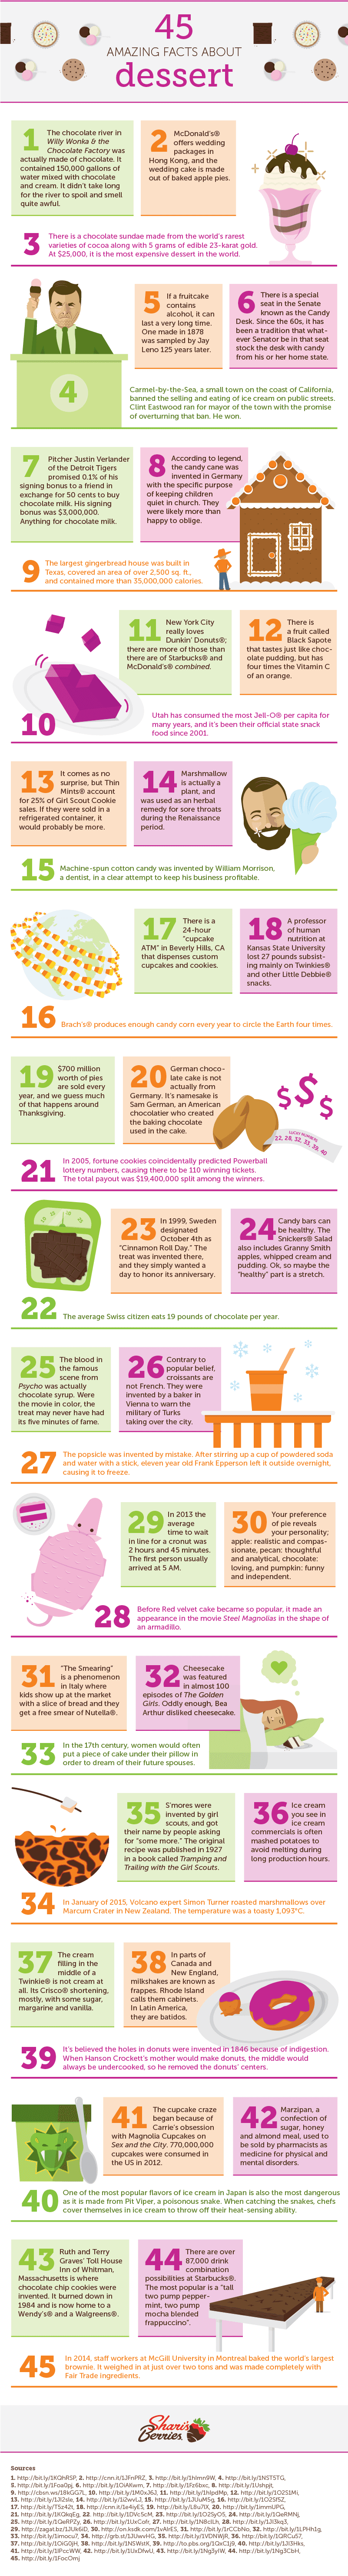 Amazing Facts About Dessert